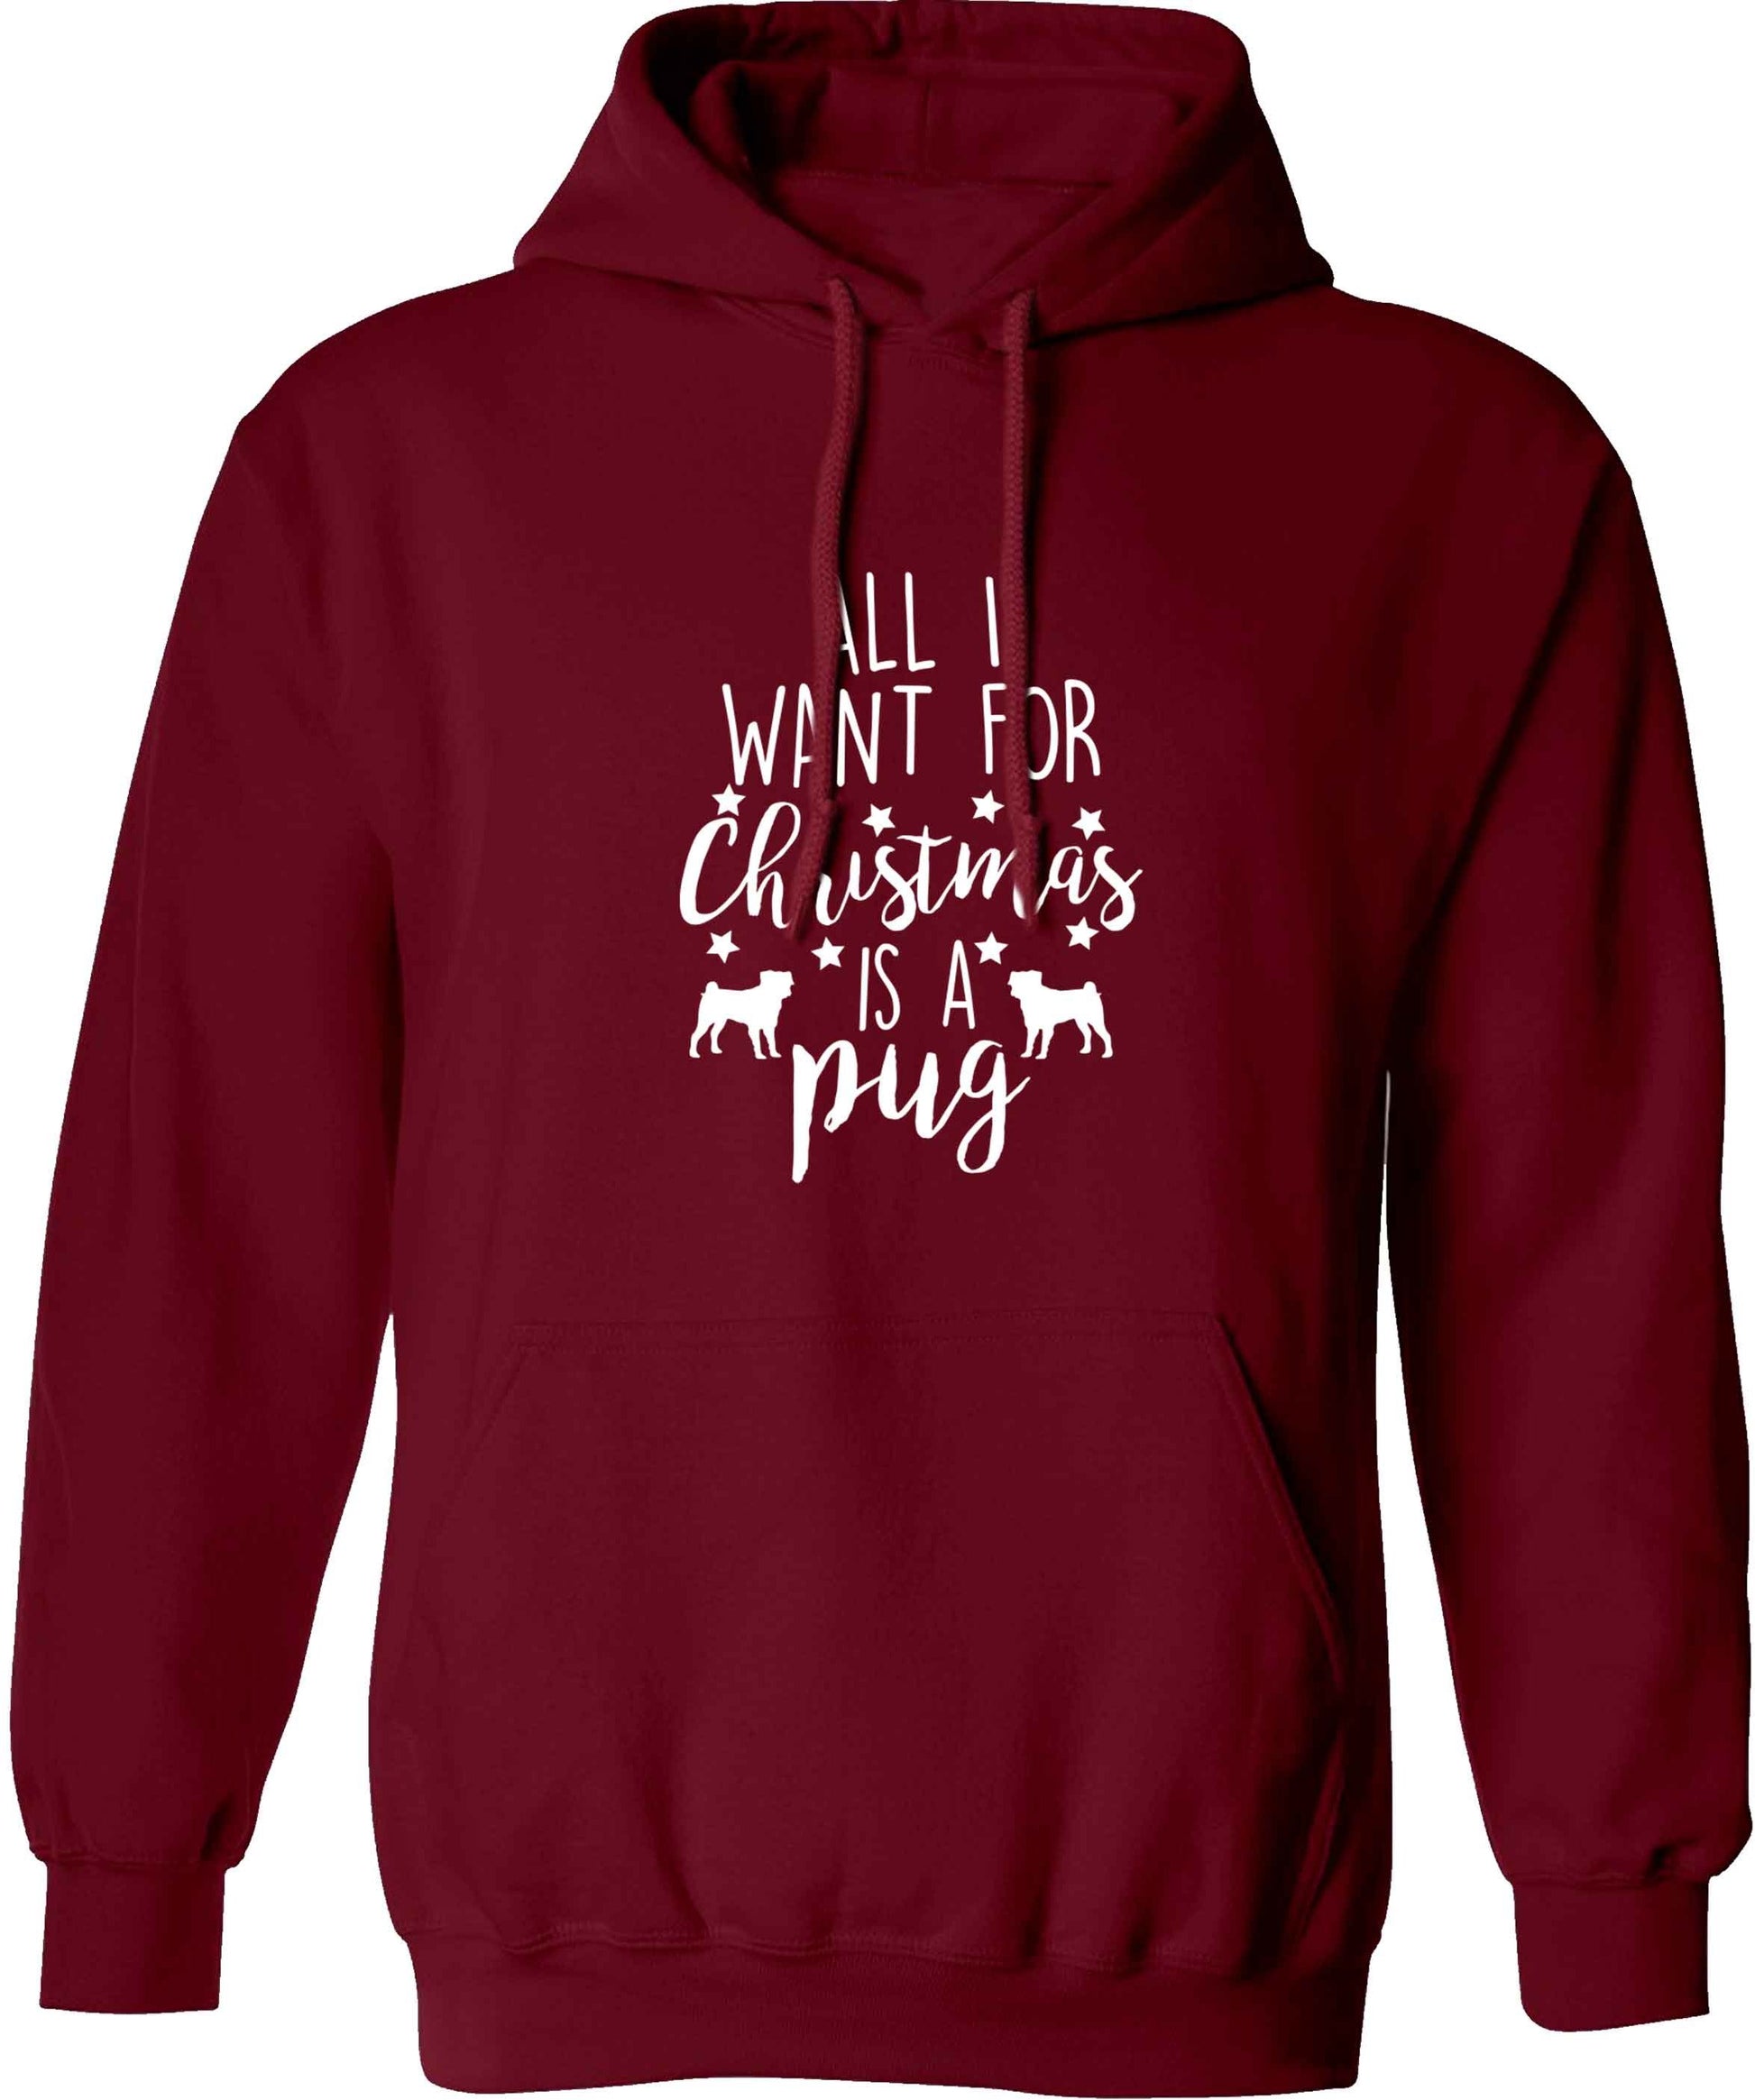 All I want for Christmas is a pug adults unisex maroon hoodie 2XL